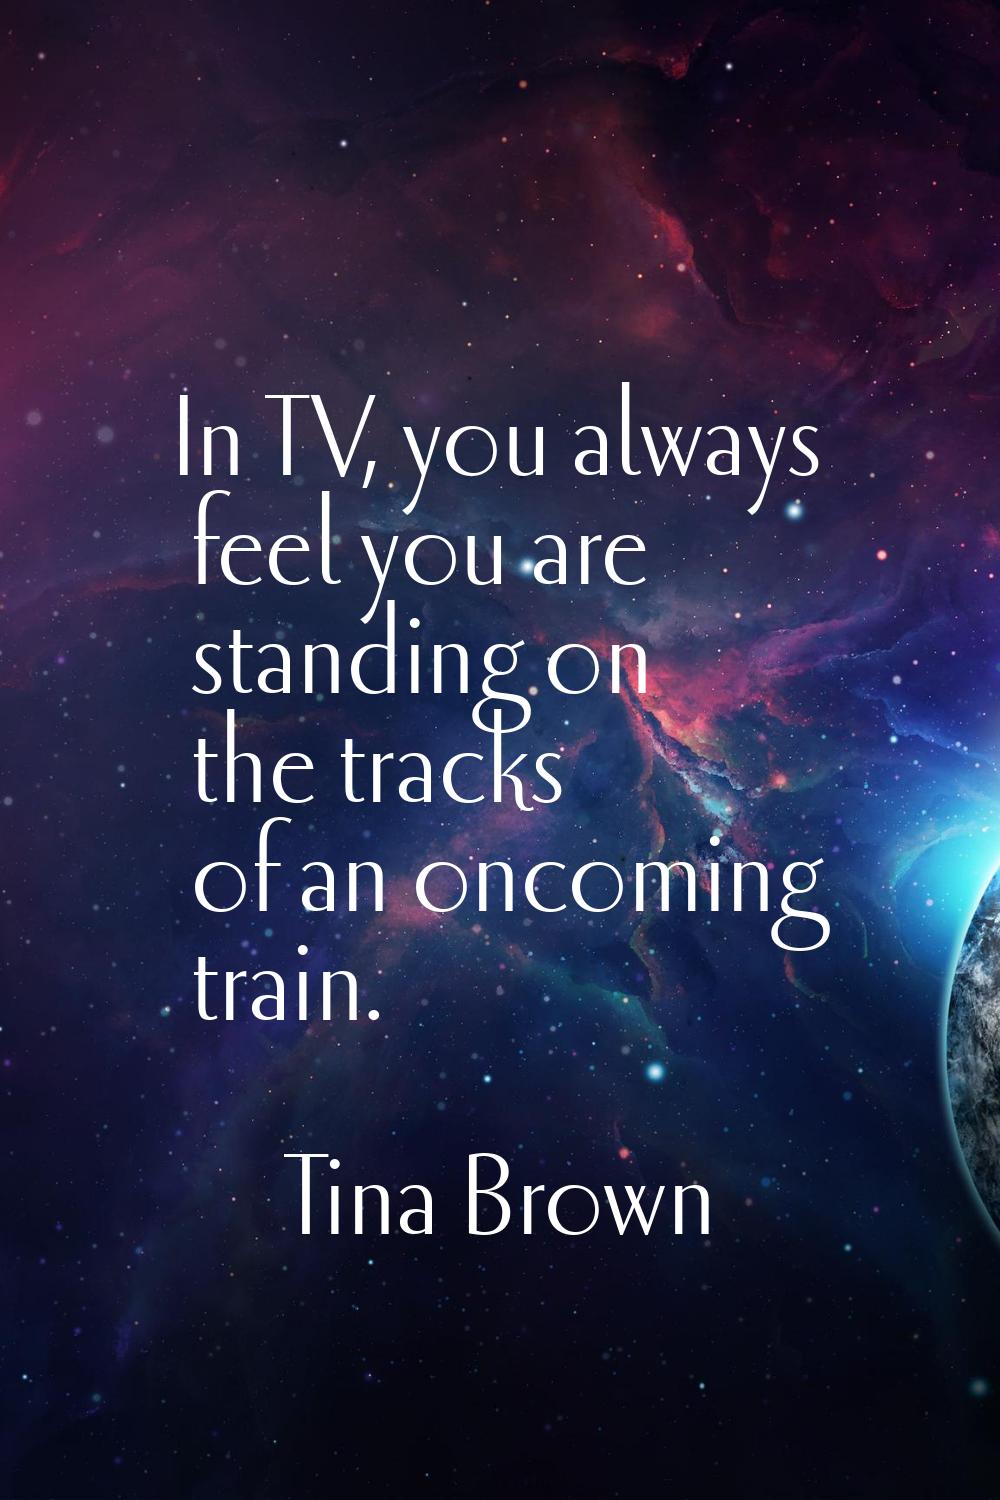 In TV, you always feel you are standing on the tracks of an oncoming train.